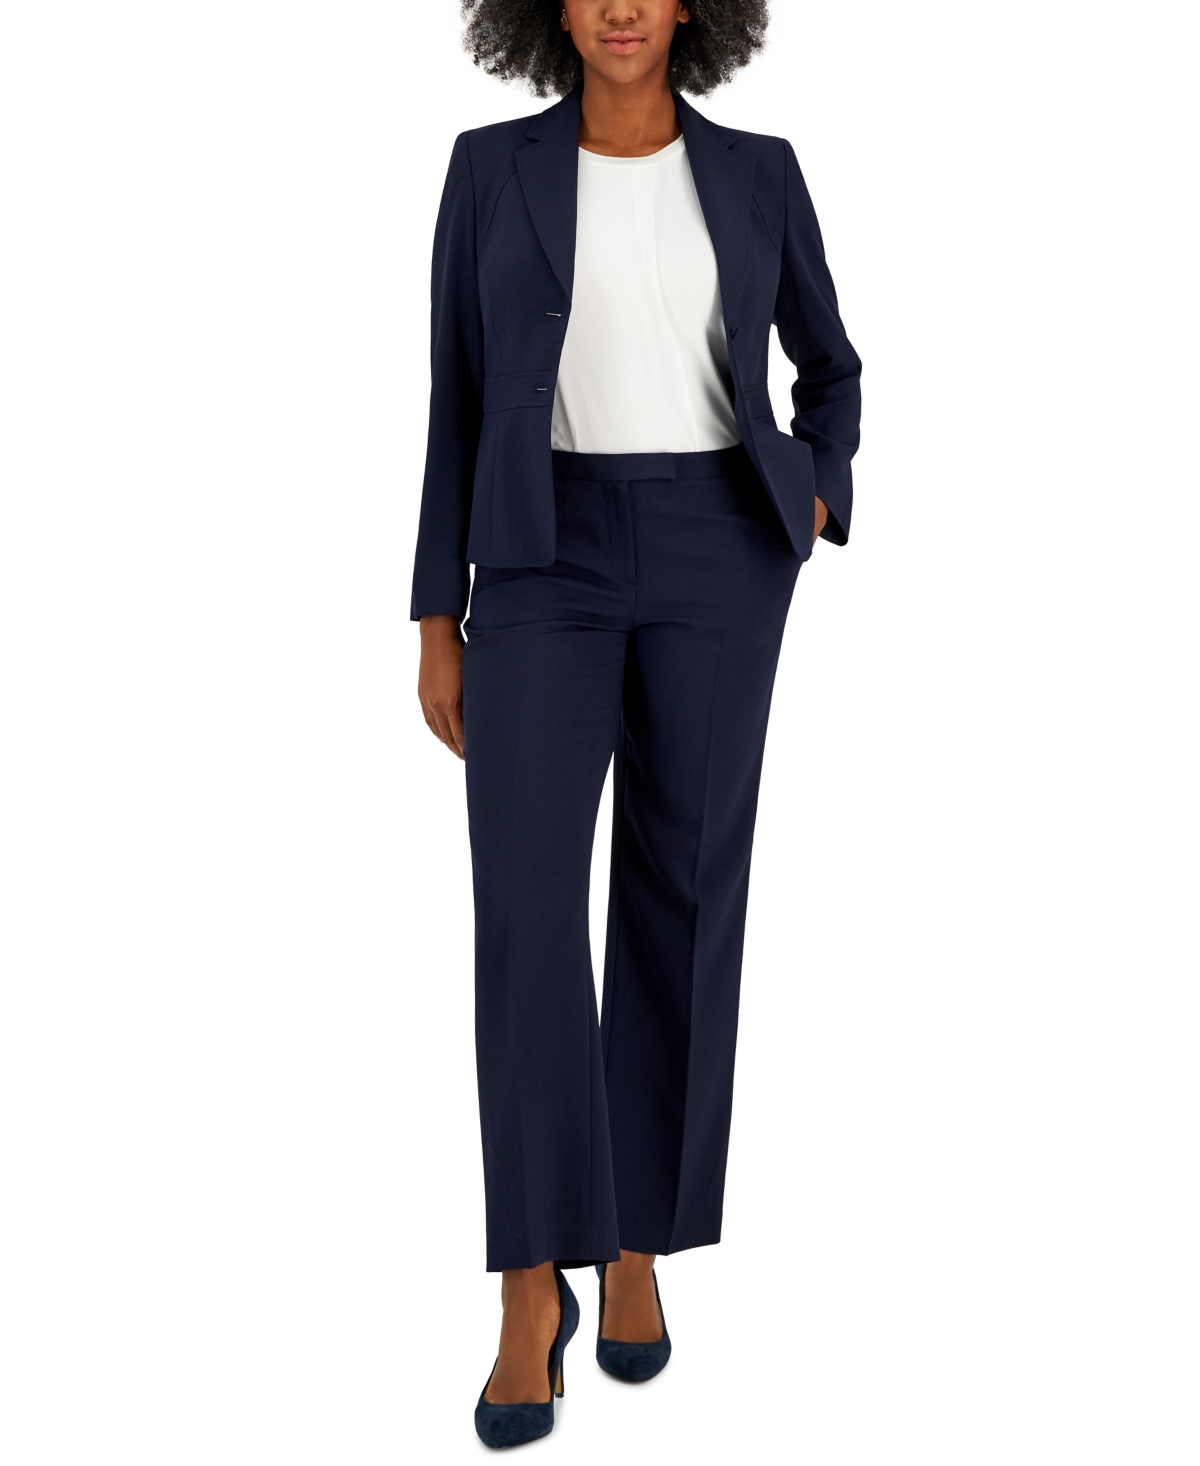 Le Suit Crepe Two-button Blazer & Pants, Regular And Petite Sizes In Navy